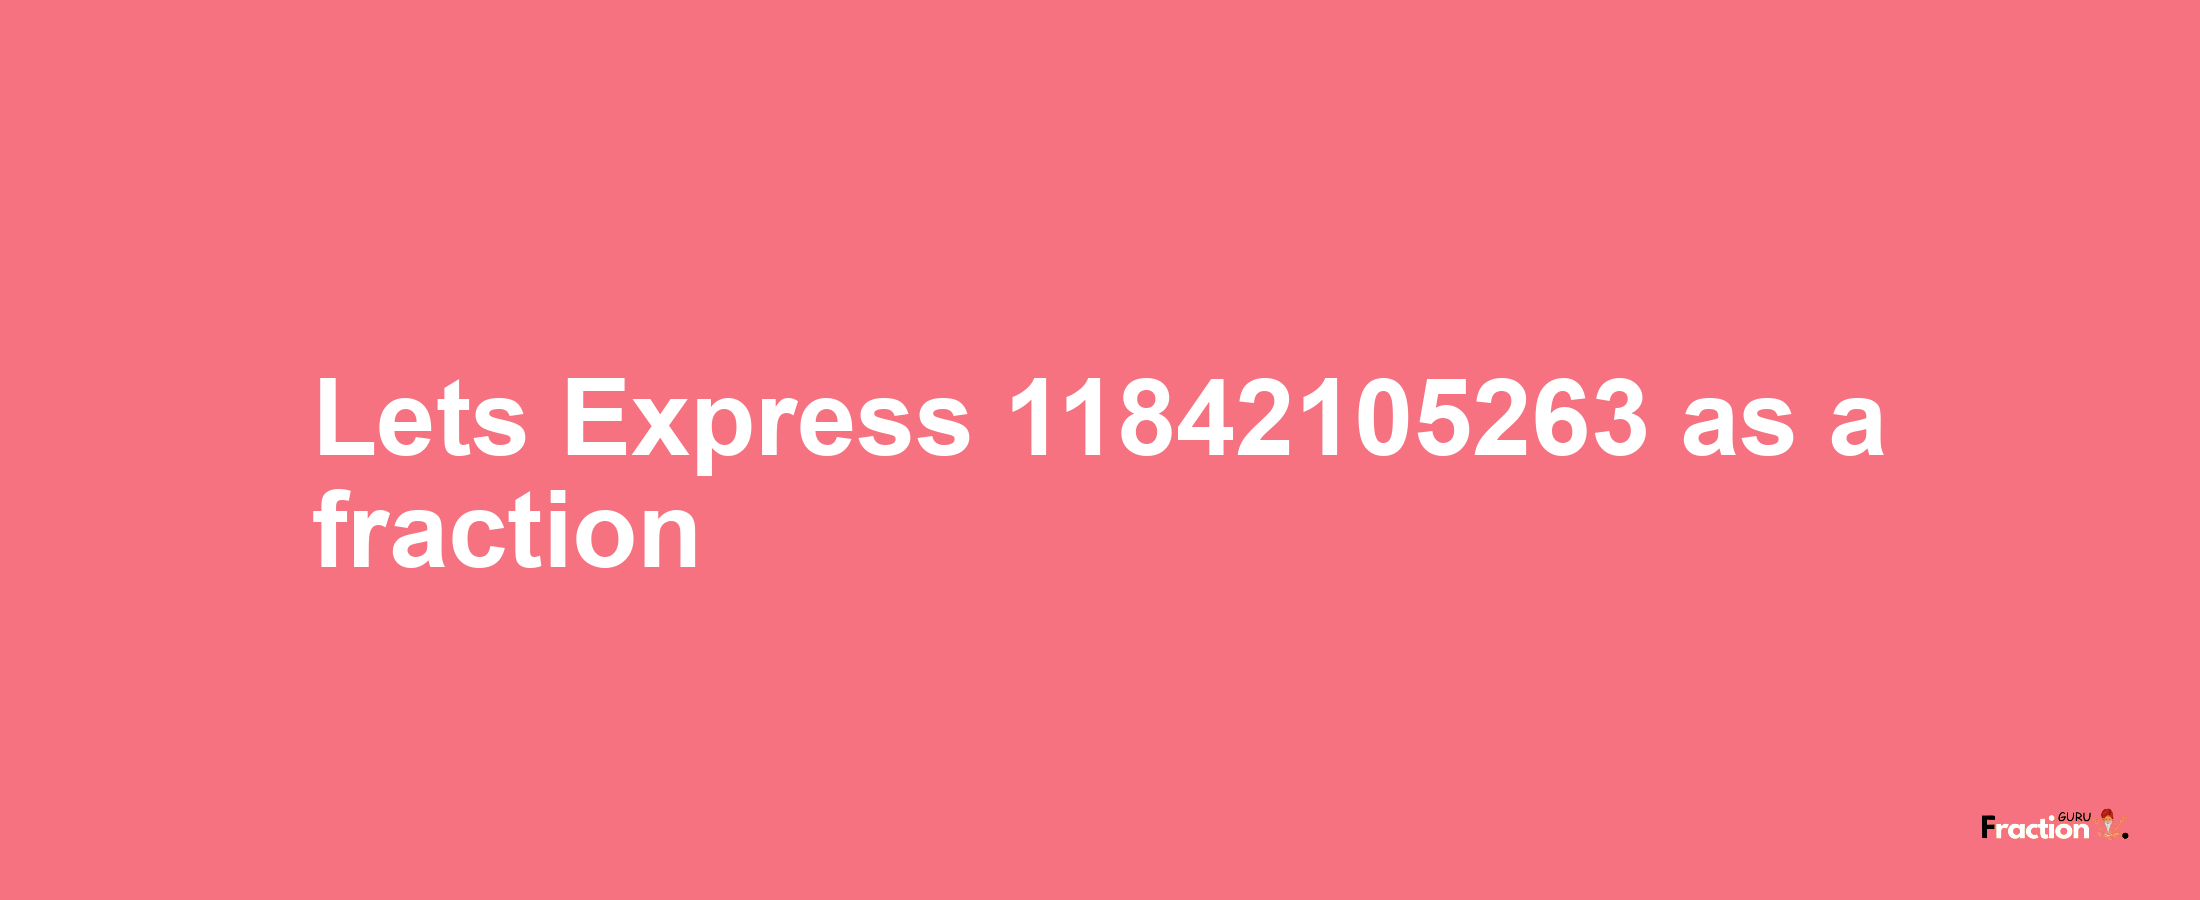 Lets Express 11842105263 as afraction